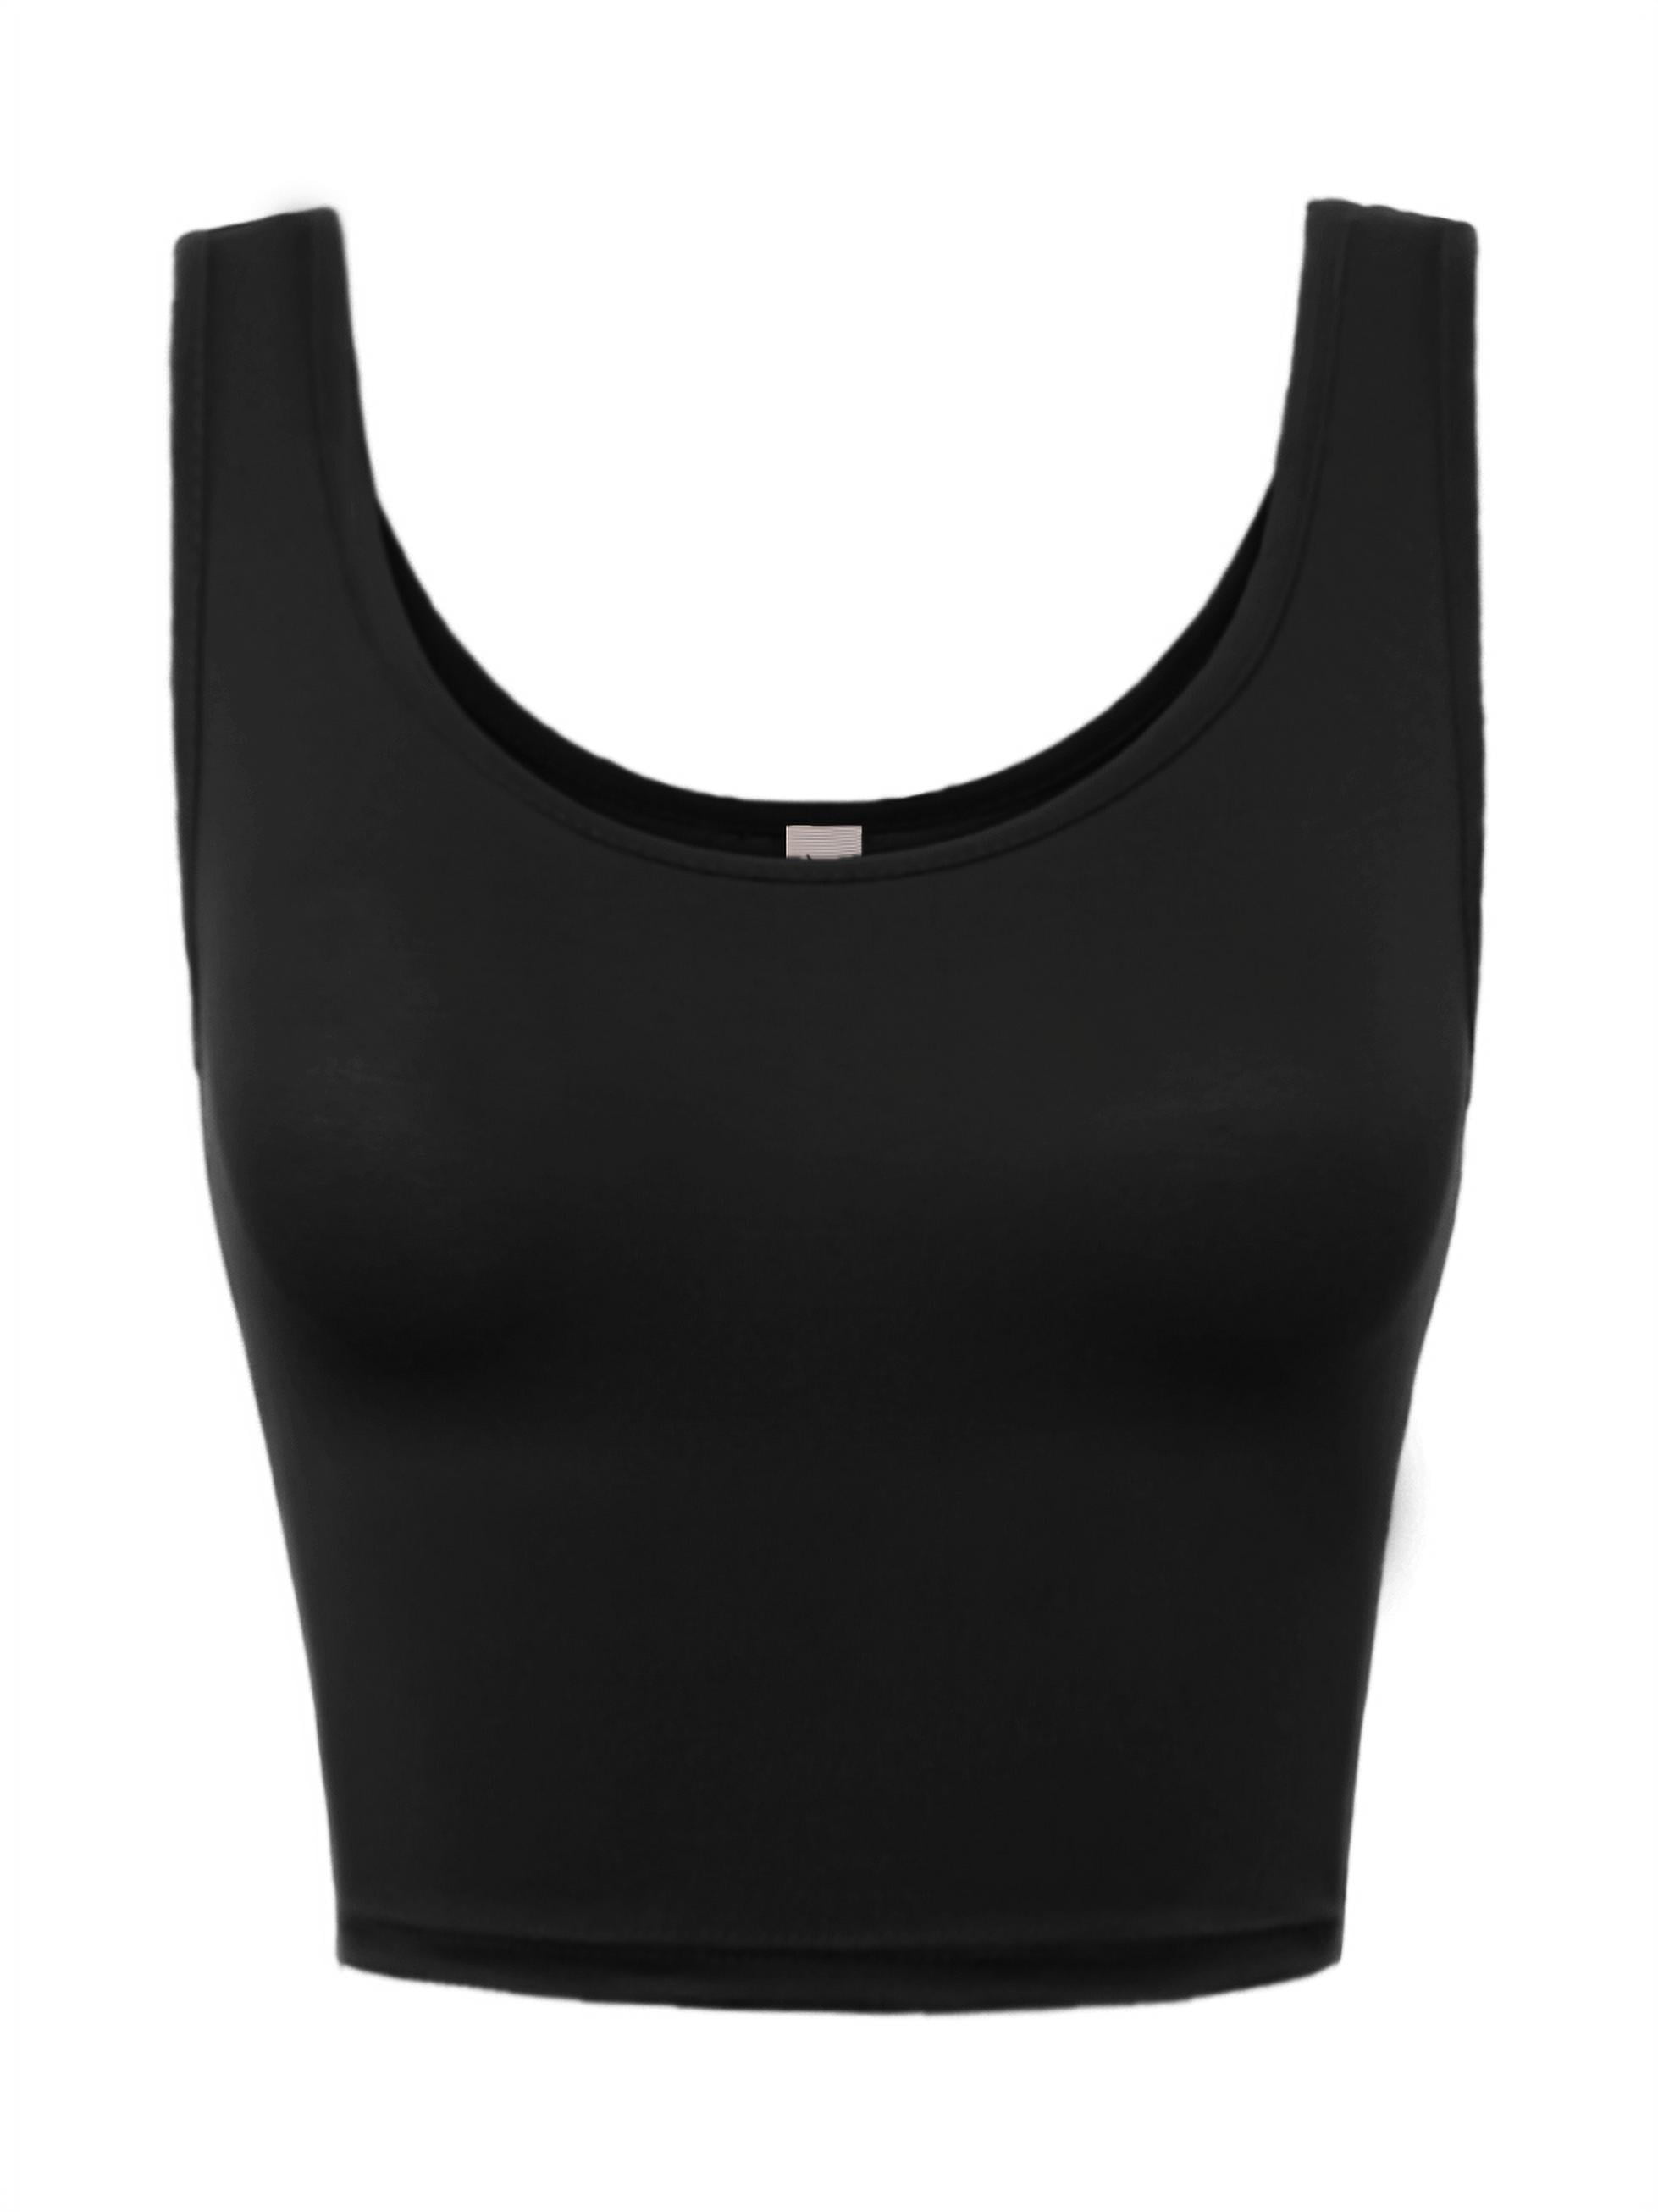 A2Y Women's Fitted Rayon Scoop Neck Sleeveless Crop Tank Top Black S ...